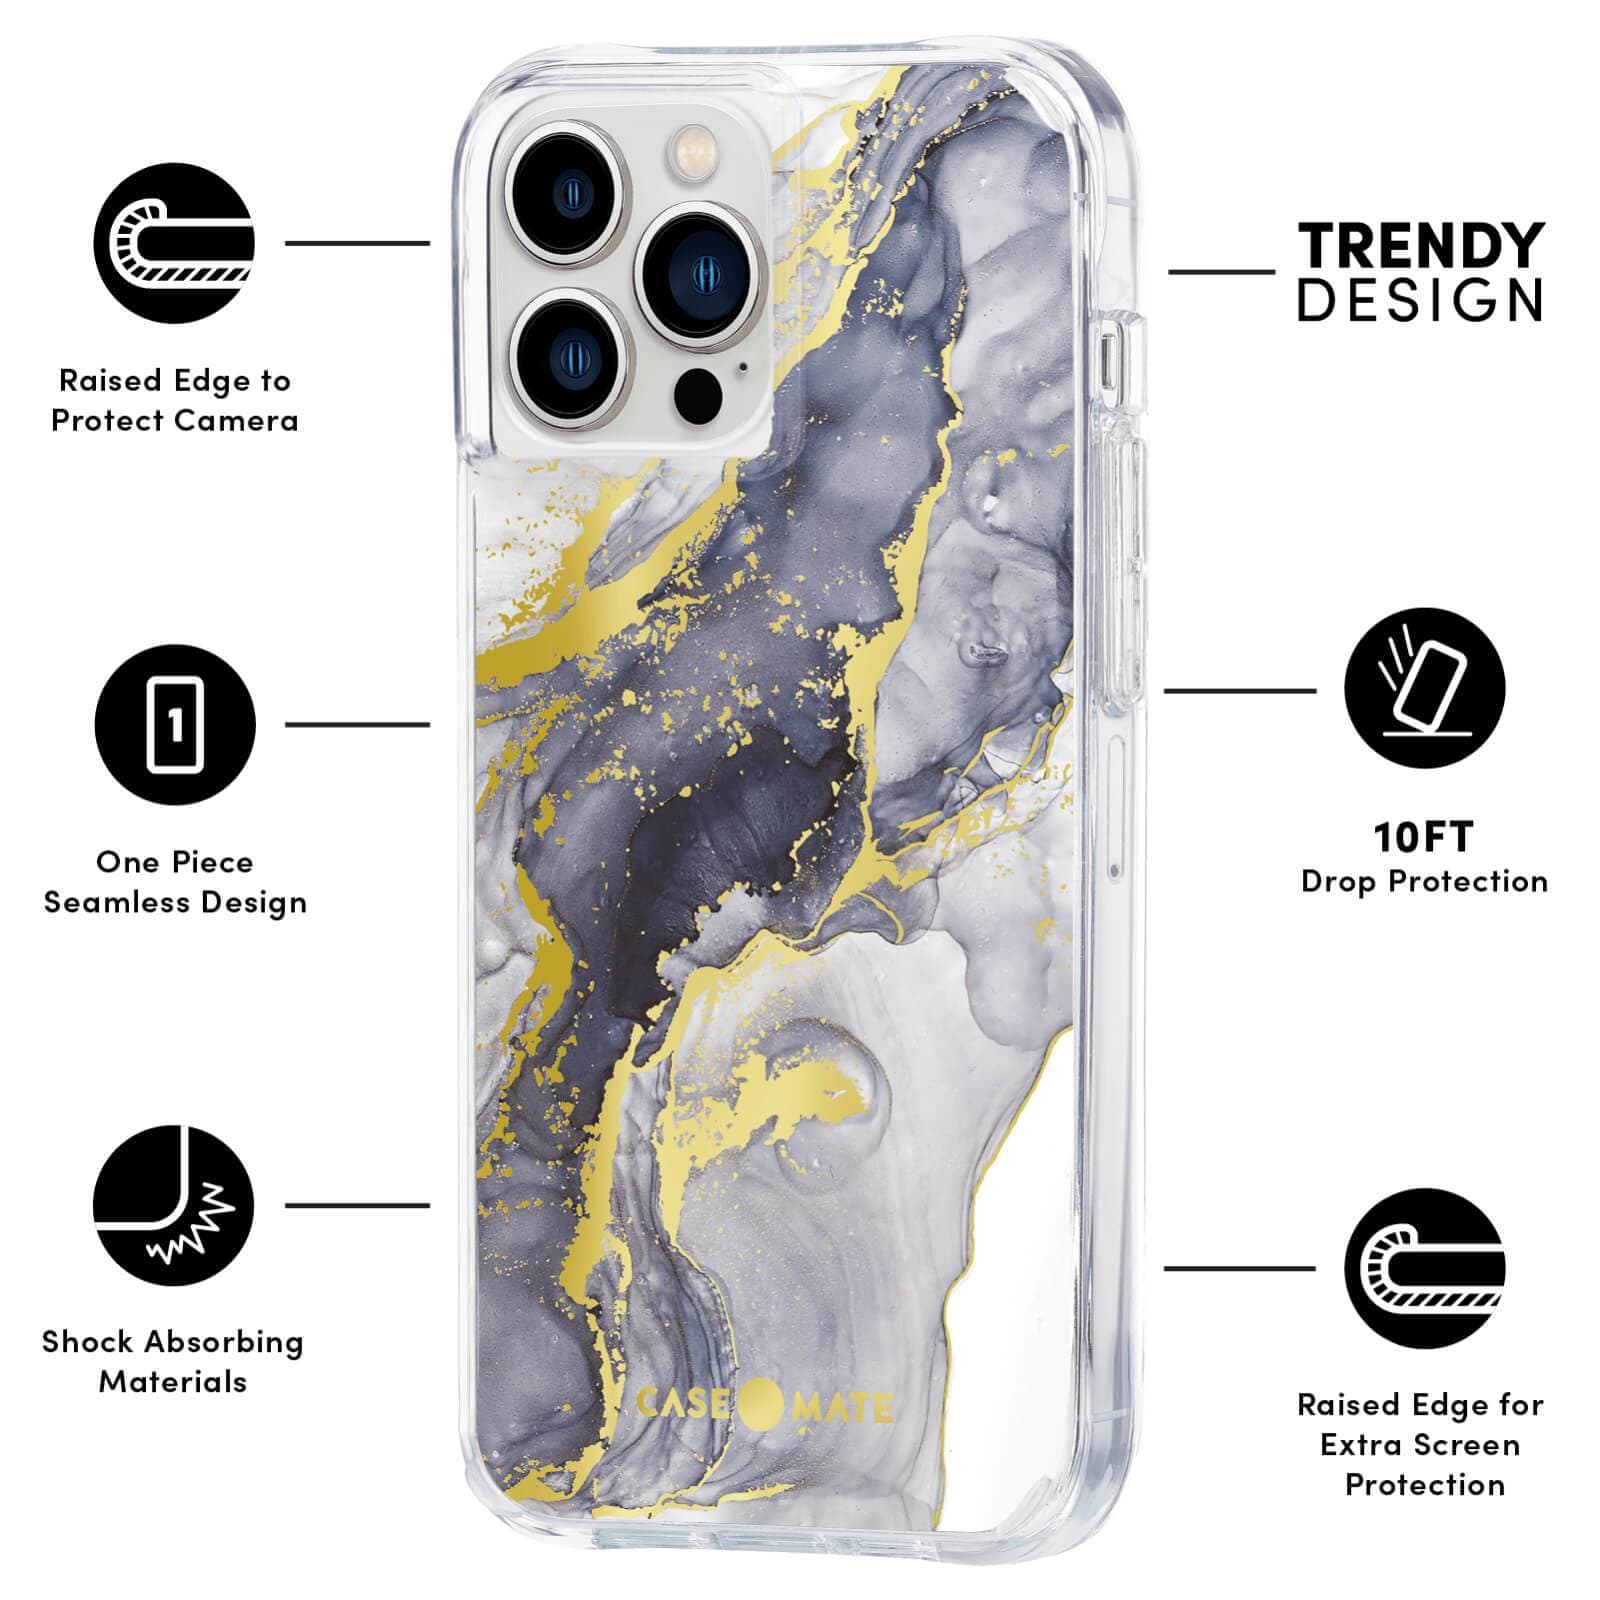 FEATURES: RAISED CAMERA TO PROTECT CAMERA, ONE PIECE SEAMLESS DESIGN, SHOCK ABSORBING MATERIALS, TRENDY DESIGN, 10 FT DROP PROTECTION, RAISED EDGE FOR EXTRA SCREEN PROTECTION. COLOR::NAVY MARBLE